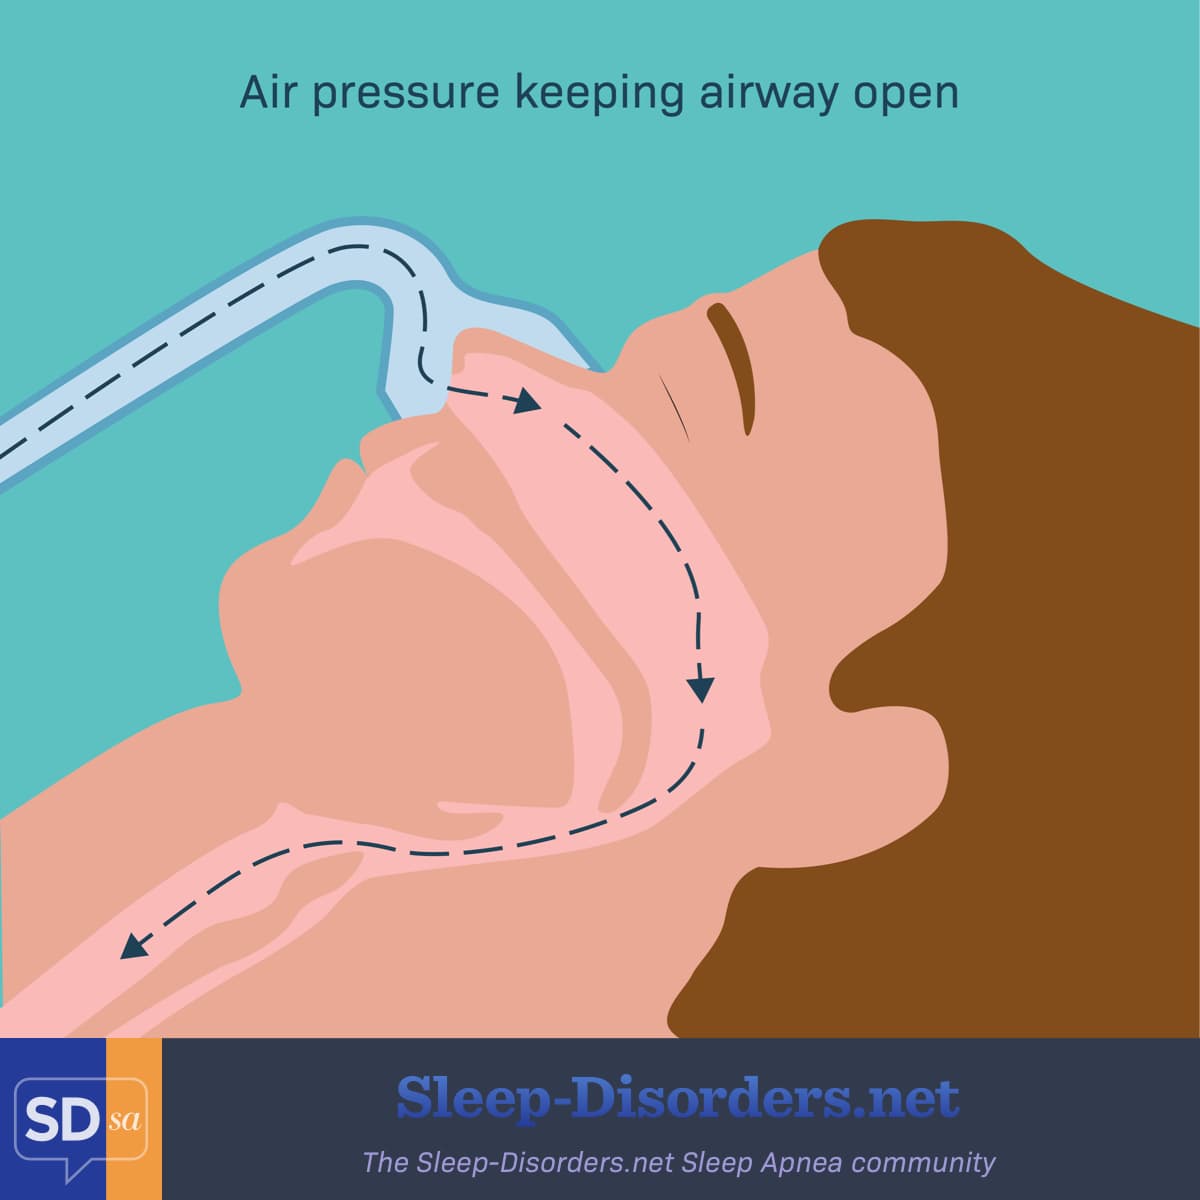 Person wearing CPAP mask, so air flow can keep airway open during sleep